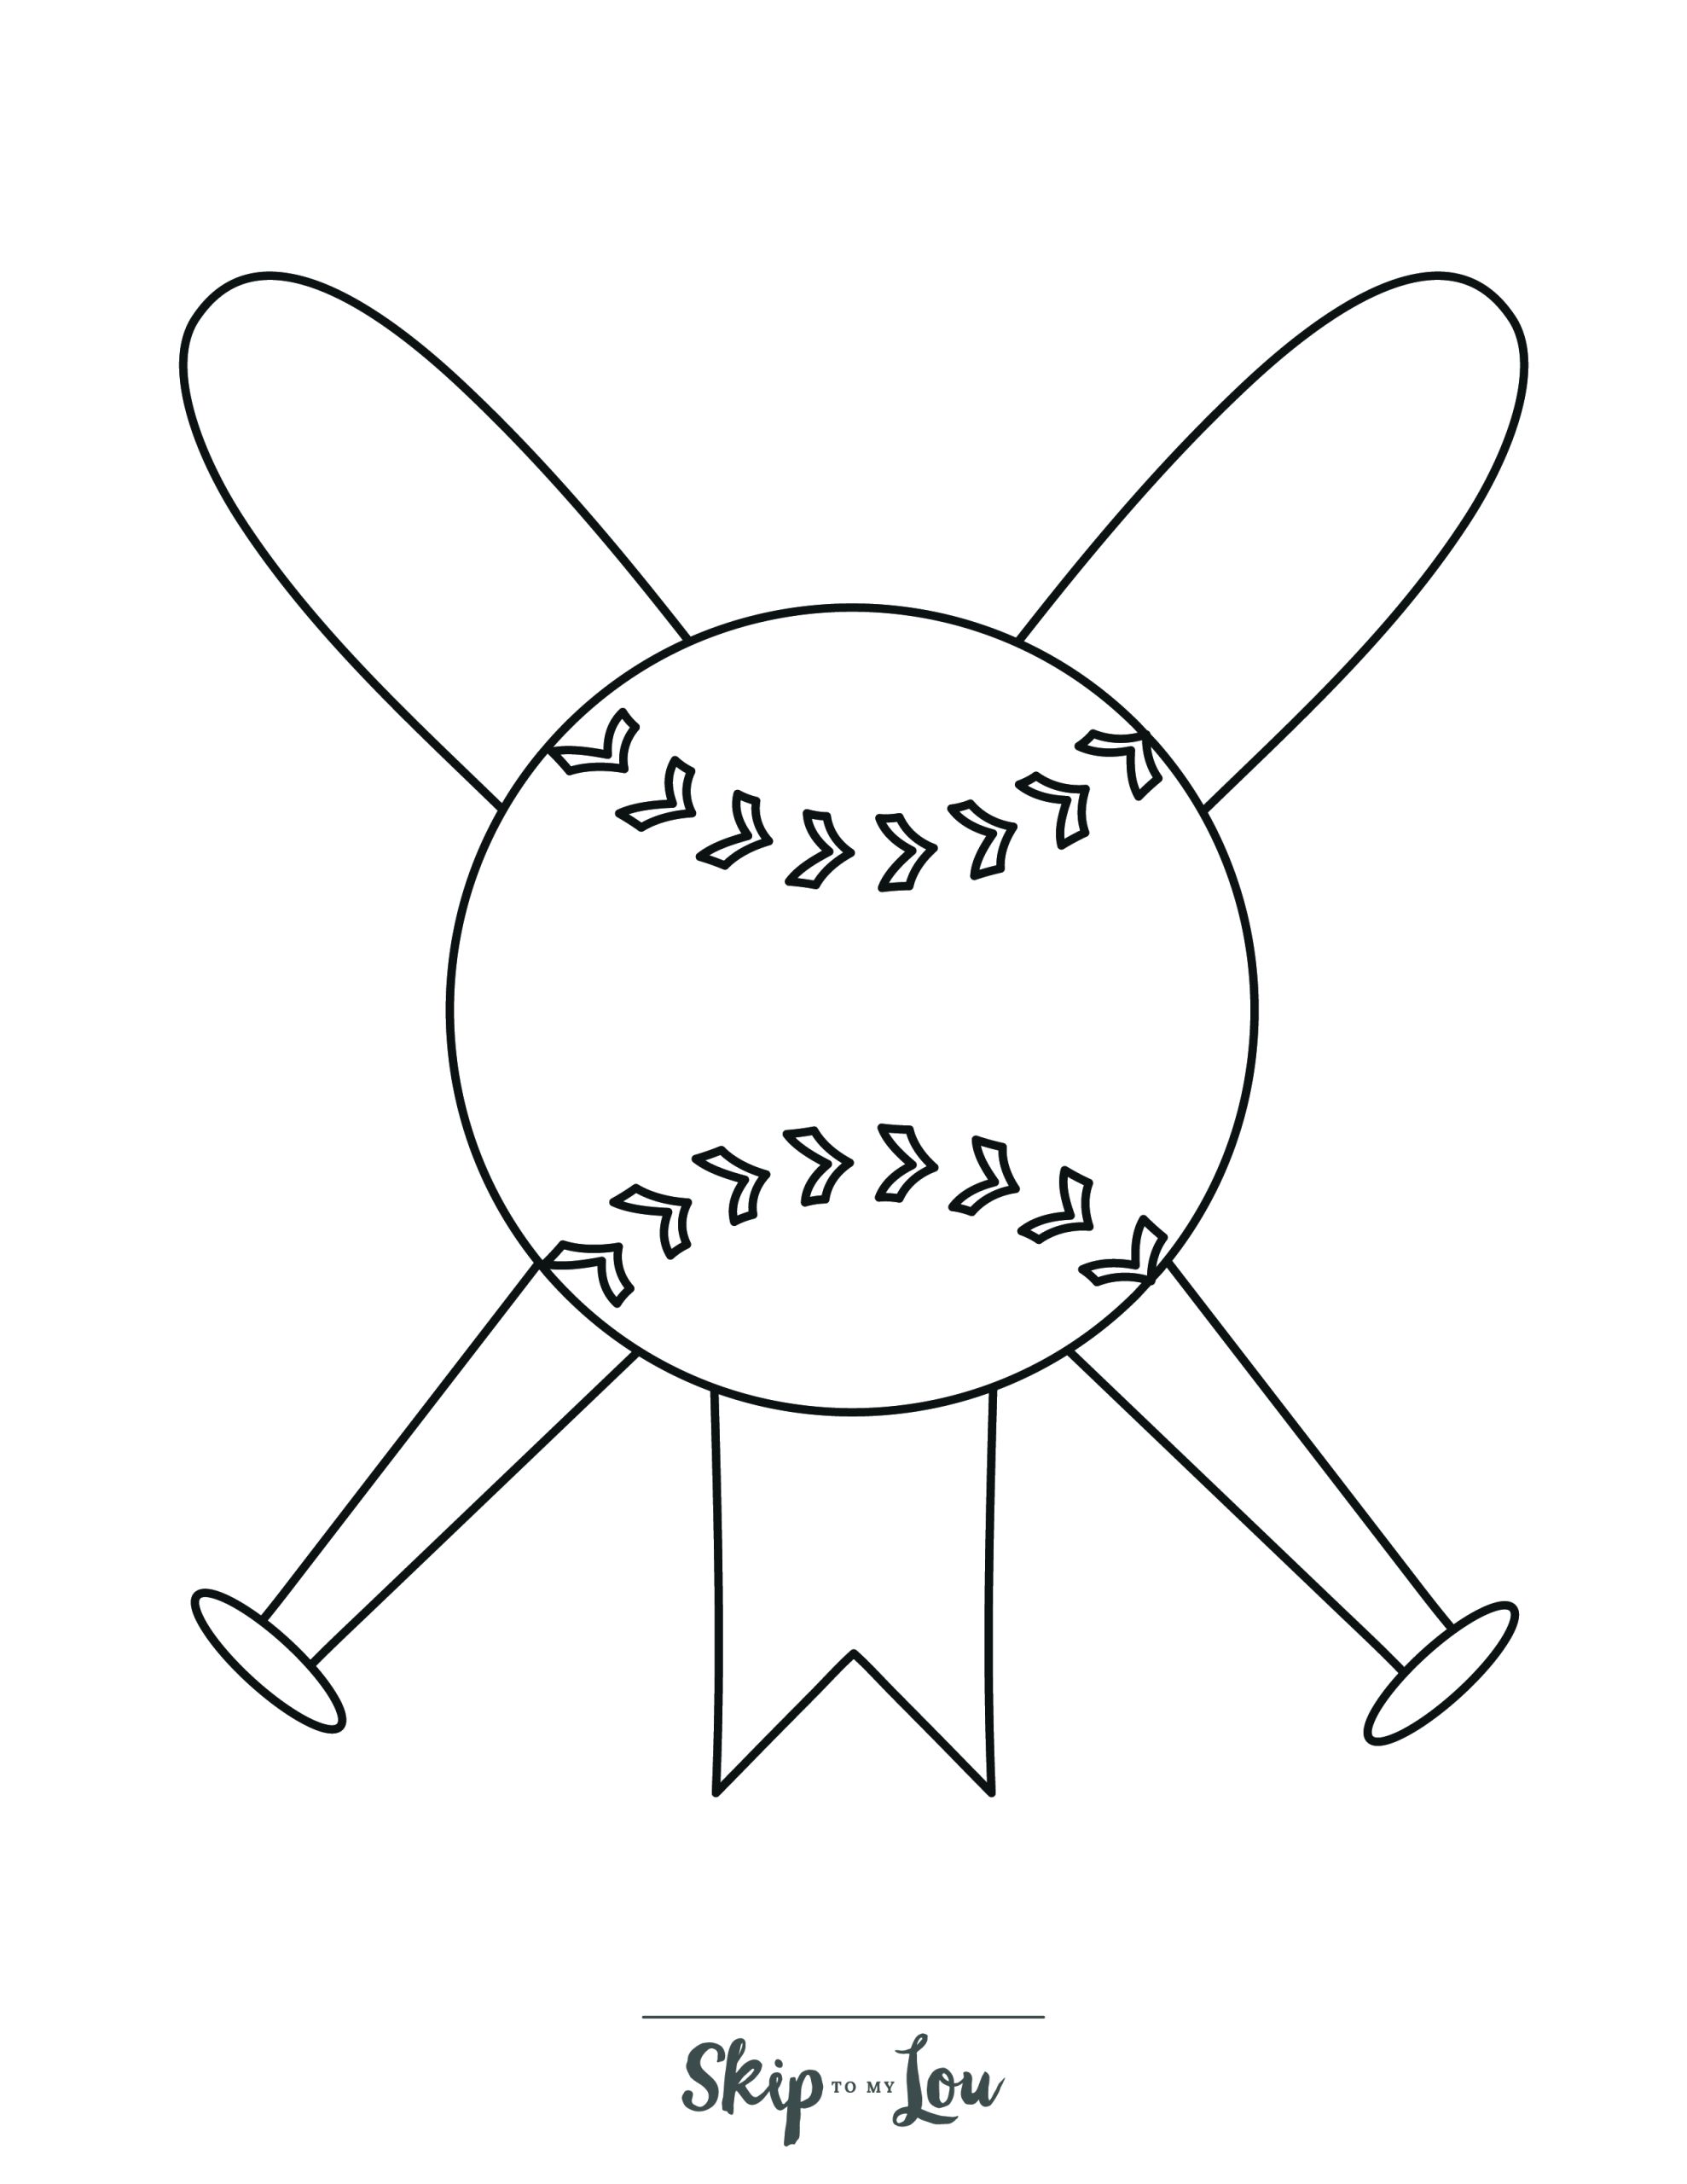 Baseball Coloring Page 5 - A line drawing of a baseball logo with a baseball in the center. Two crossed bats are behind. 